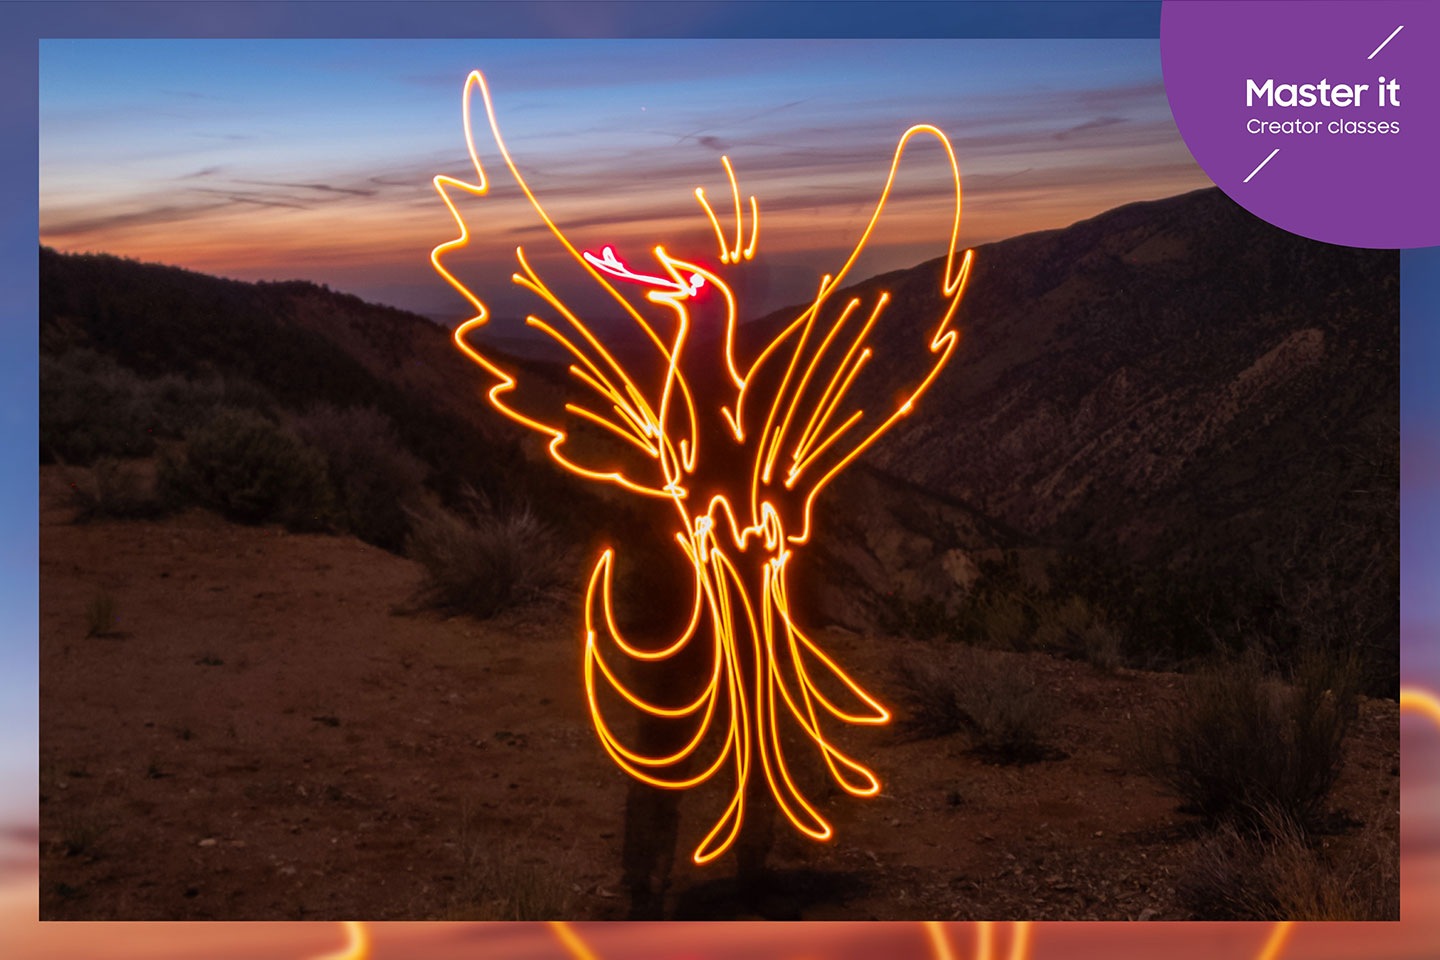 Samsung Galaxy S22 Ultra 5G photography - A man at sunrise makes a light painting of a rising phoenix in the air. Master it. Creator classes.